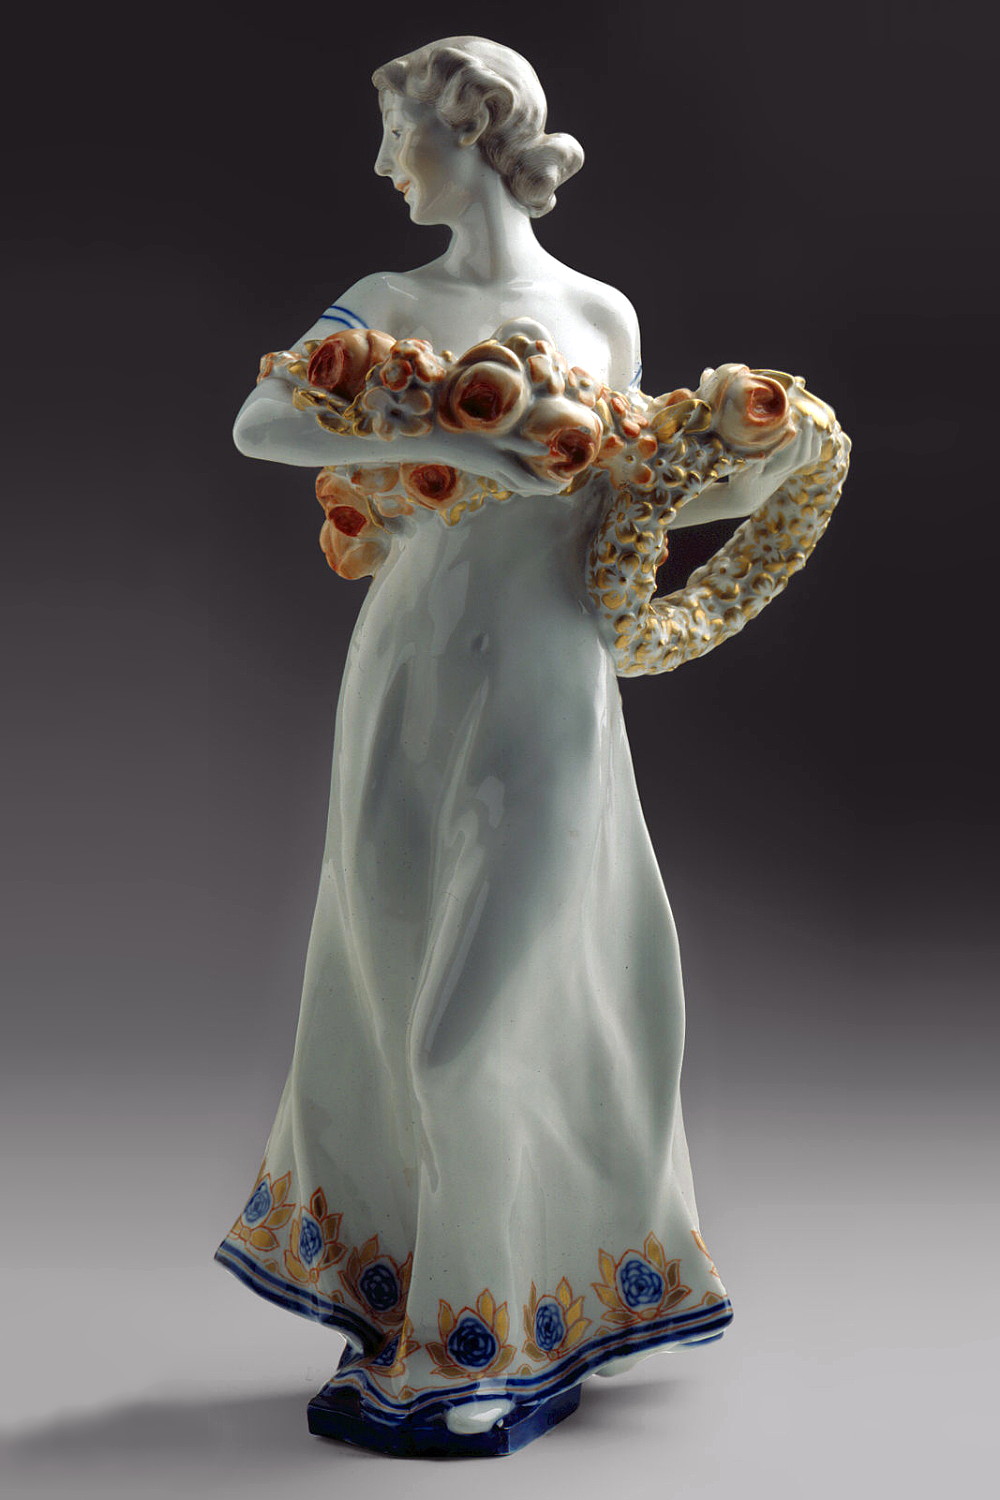 Meissen figure of Girl with roses by Theodor Eichler. Model A250